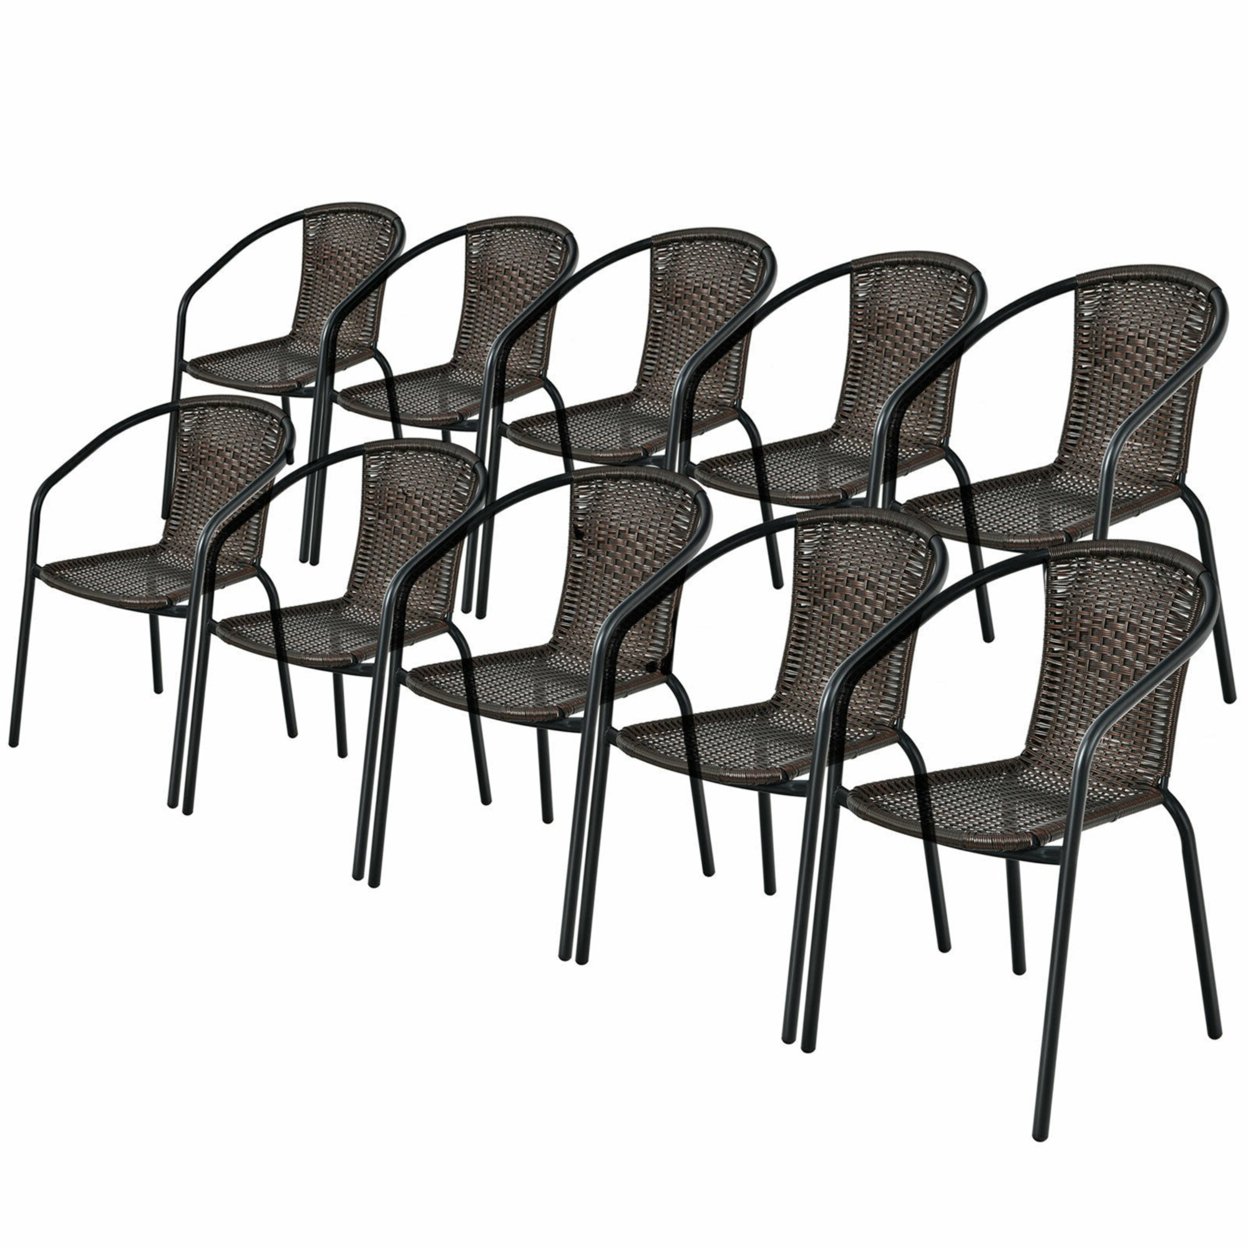 Gymax Patio Rattan Dining Chair Outdoor Stackable Armchair Yard Garden - Brown, 10 Pcs